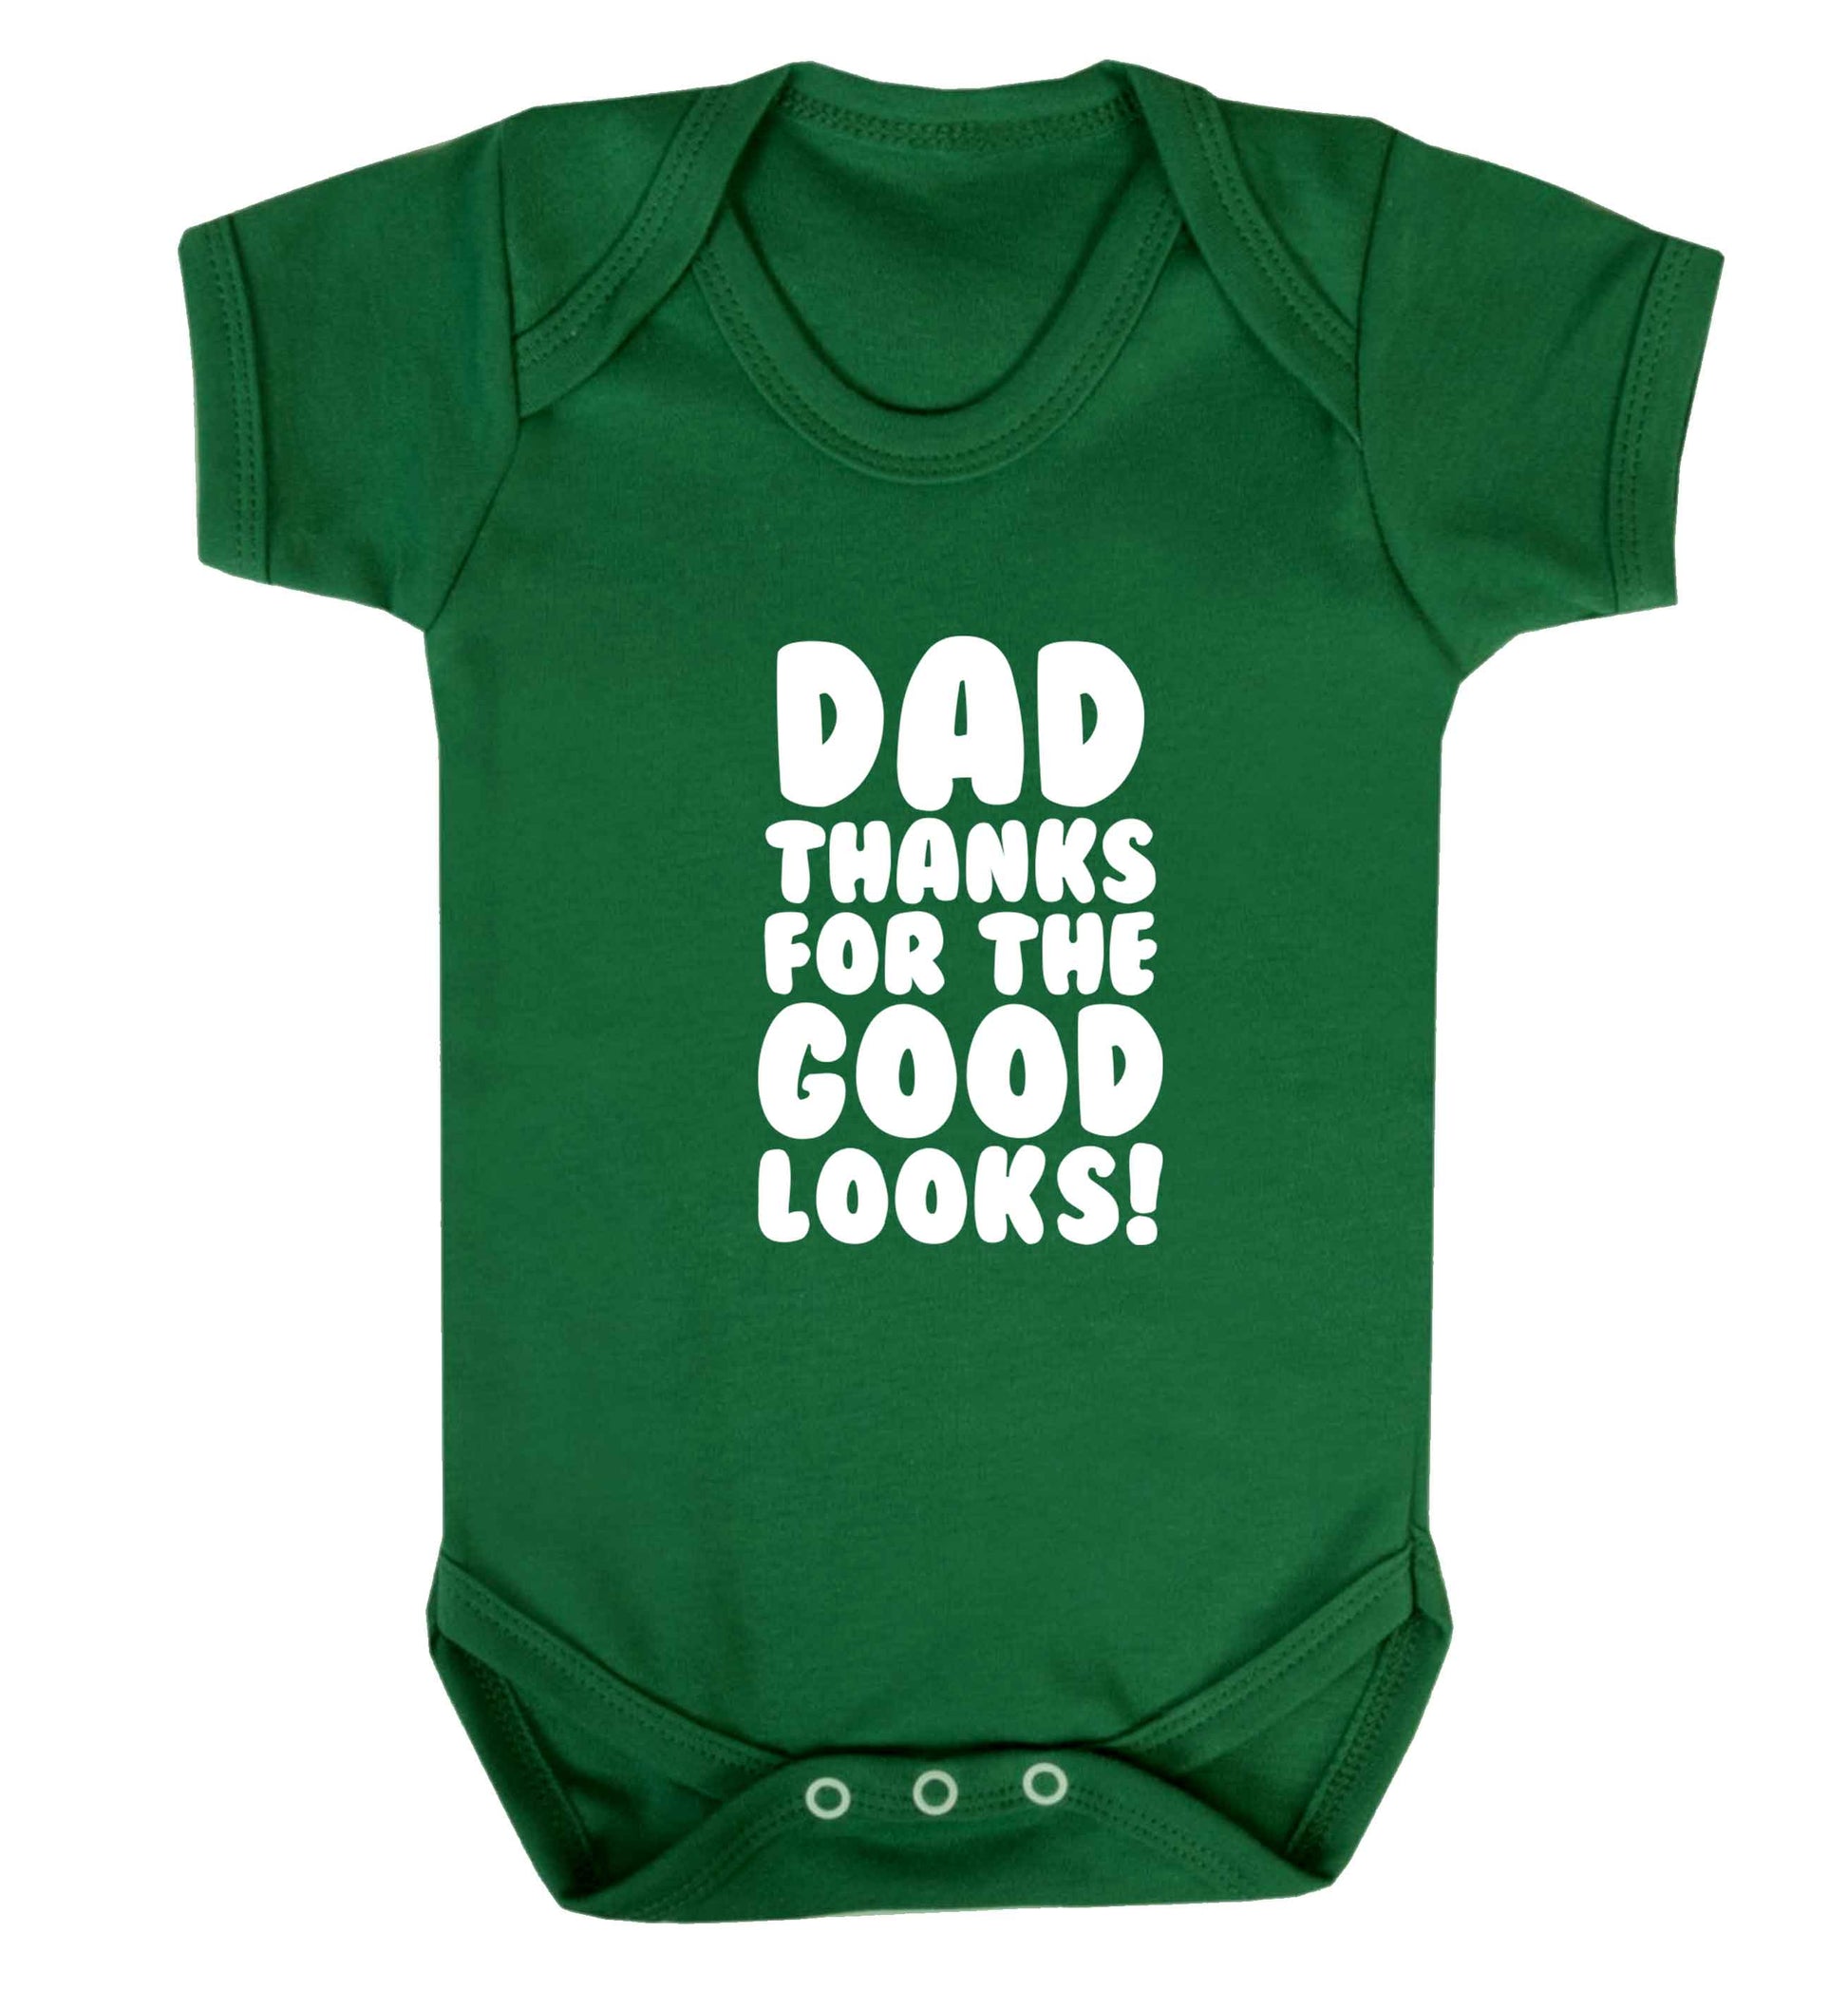 Dad thanks for the good looks baby vest green 18-24 months